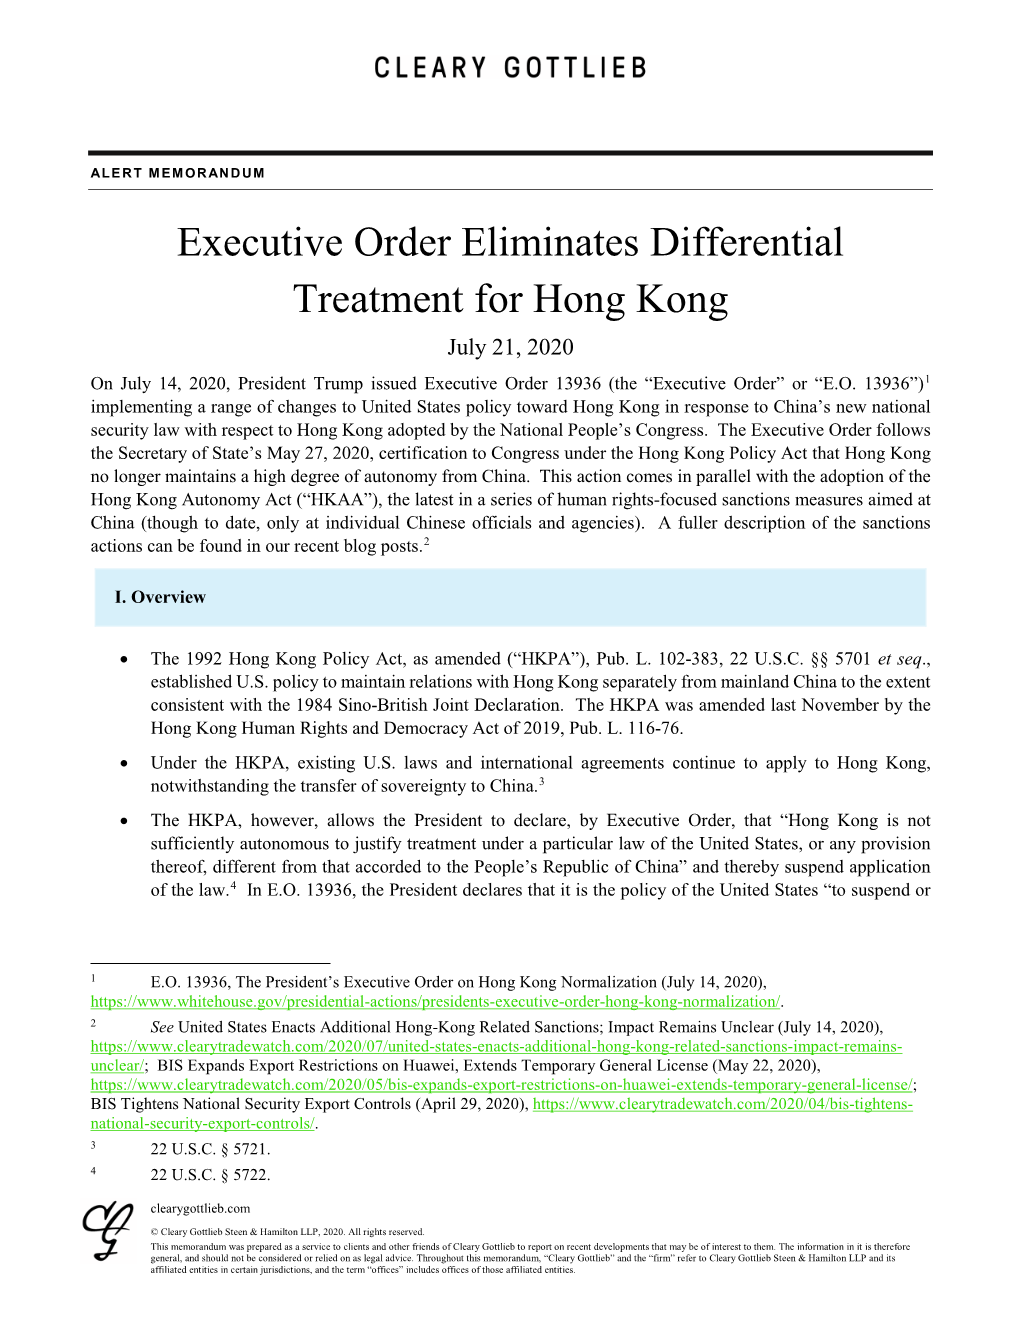 Executive Order Eliminates Differential Treatment for Hong Kong